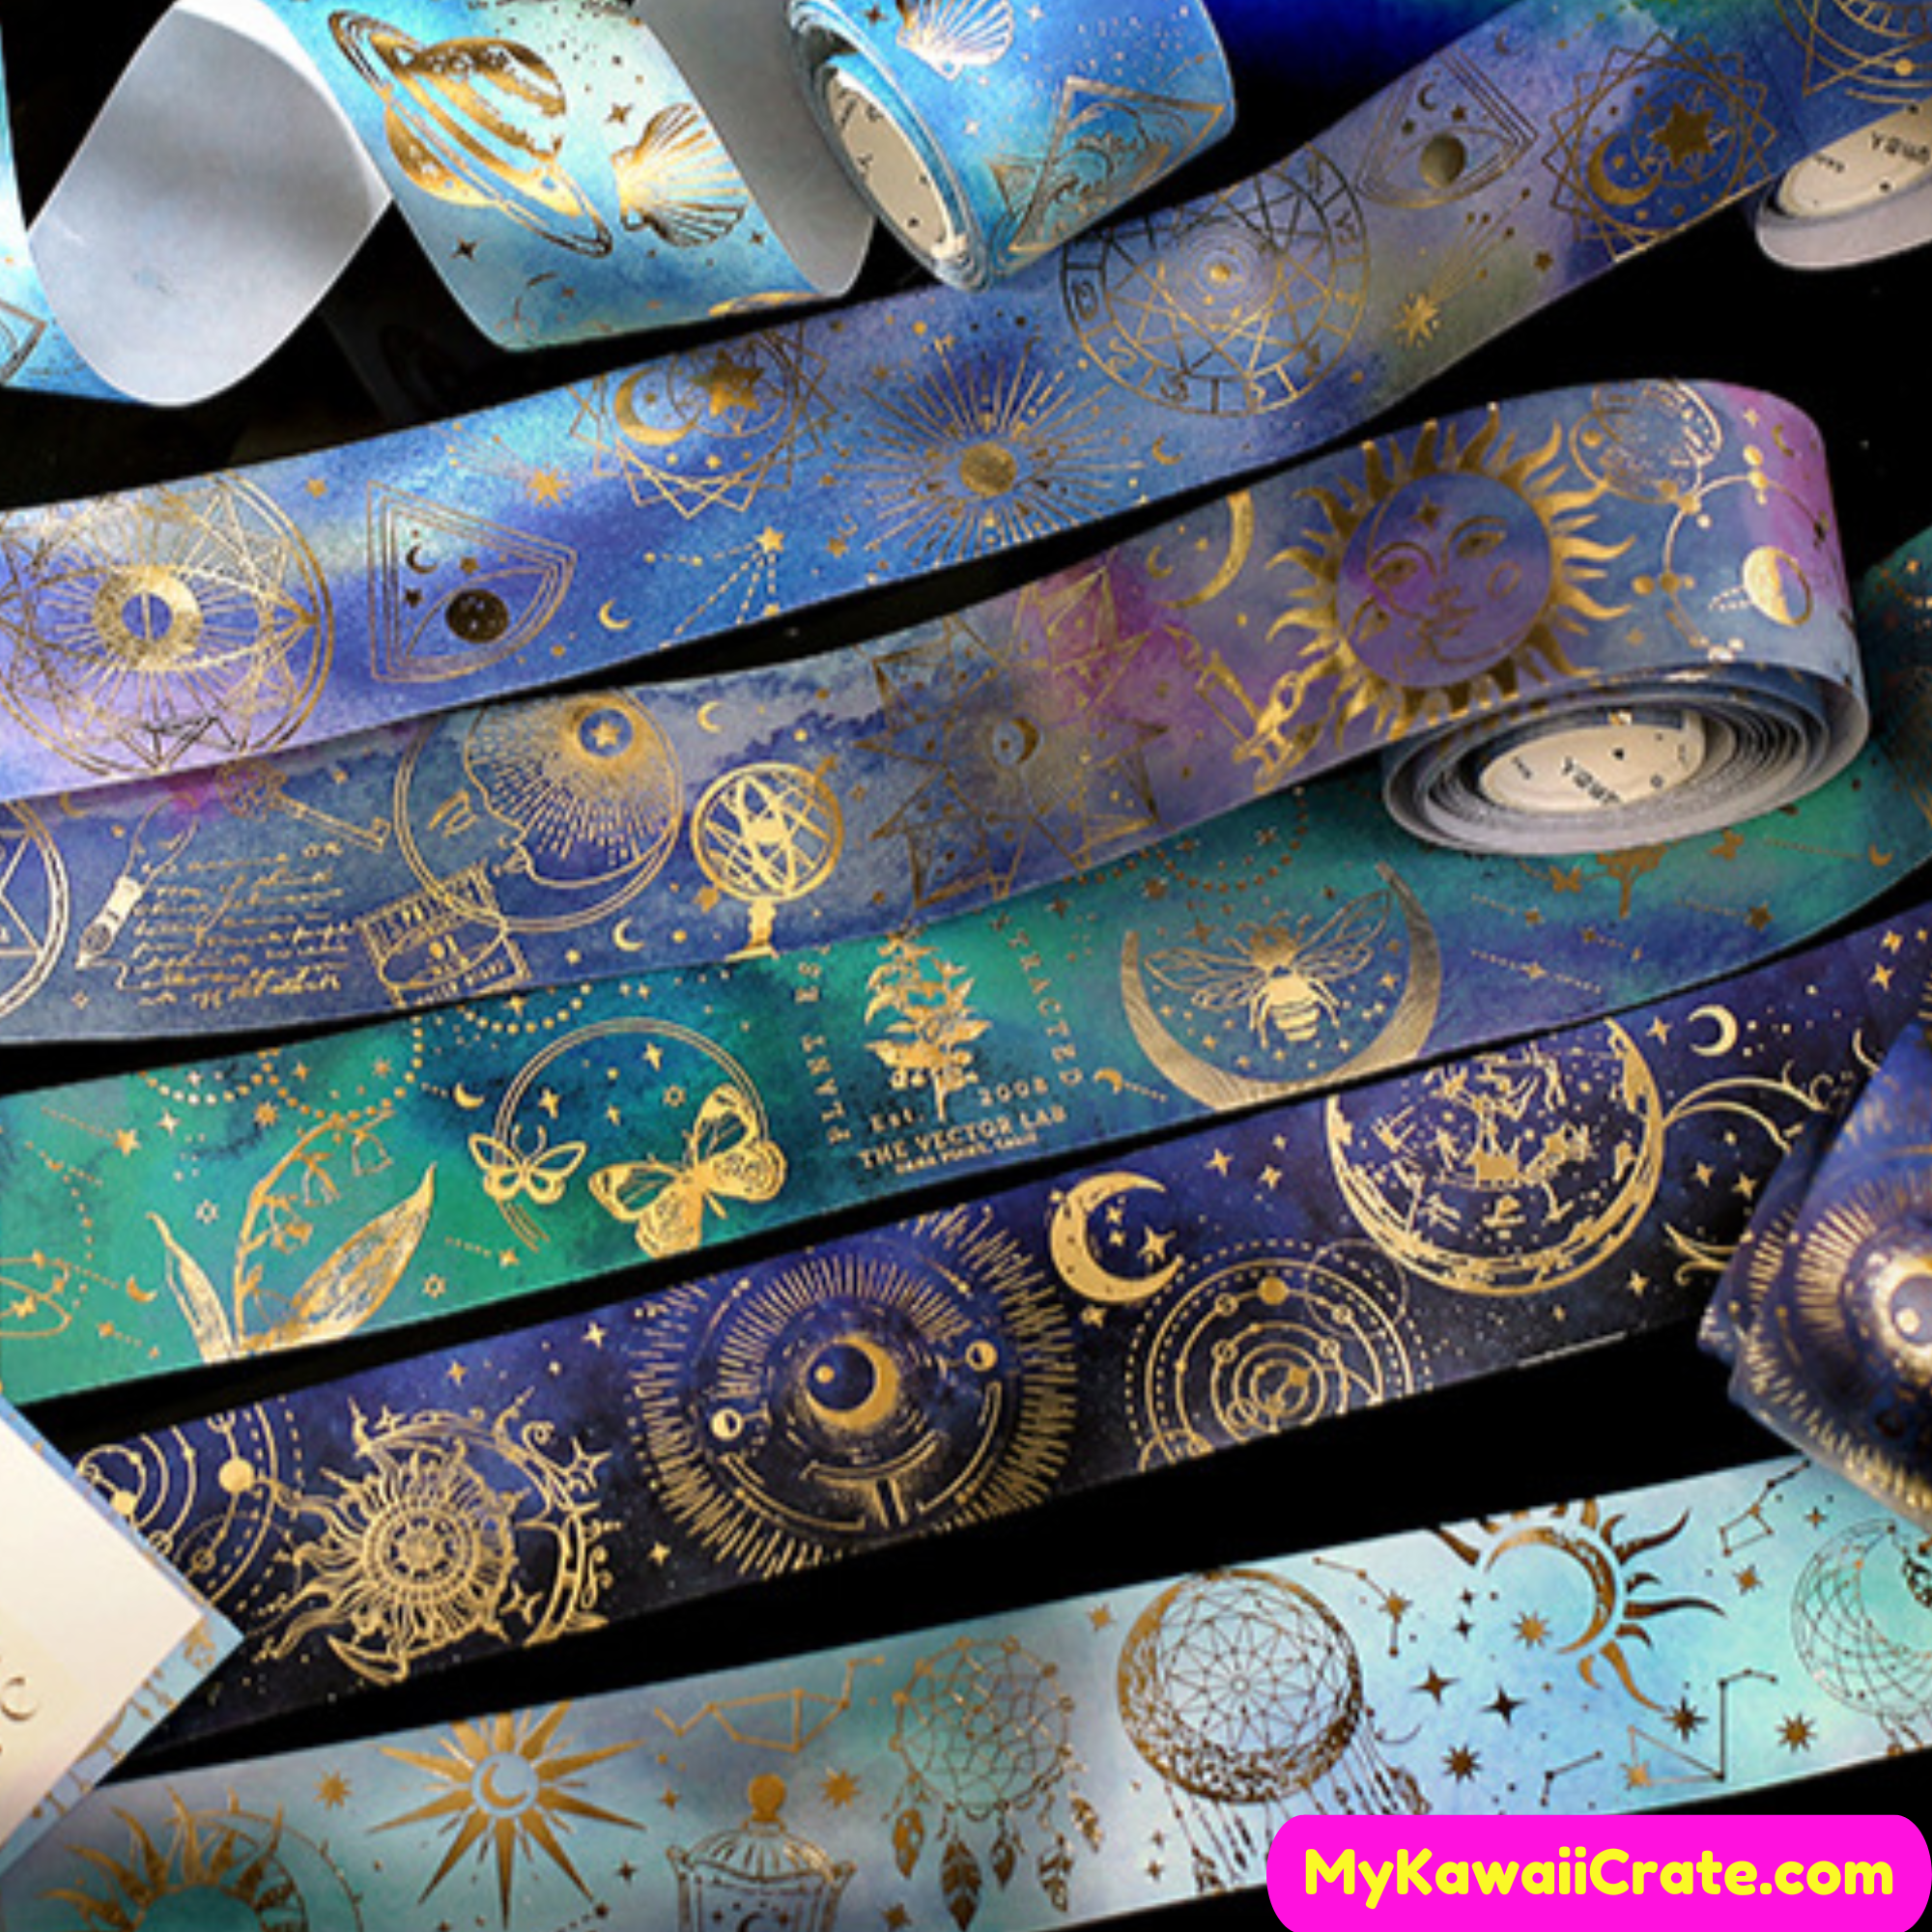 Silver Foil Celestial Washi Tape / Starry Night Washi / Moon and Planets /  Decorative Masking Tape / Gift for Crafter / Galaxy Washi Tape 